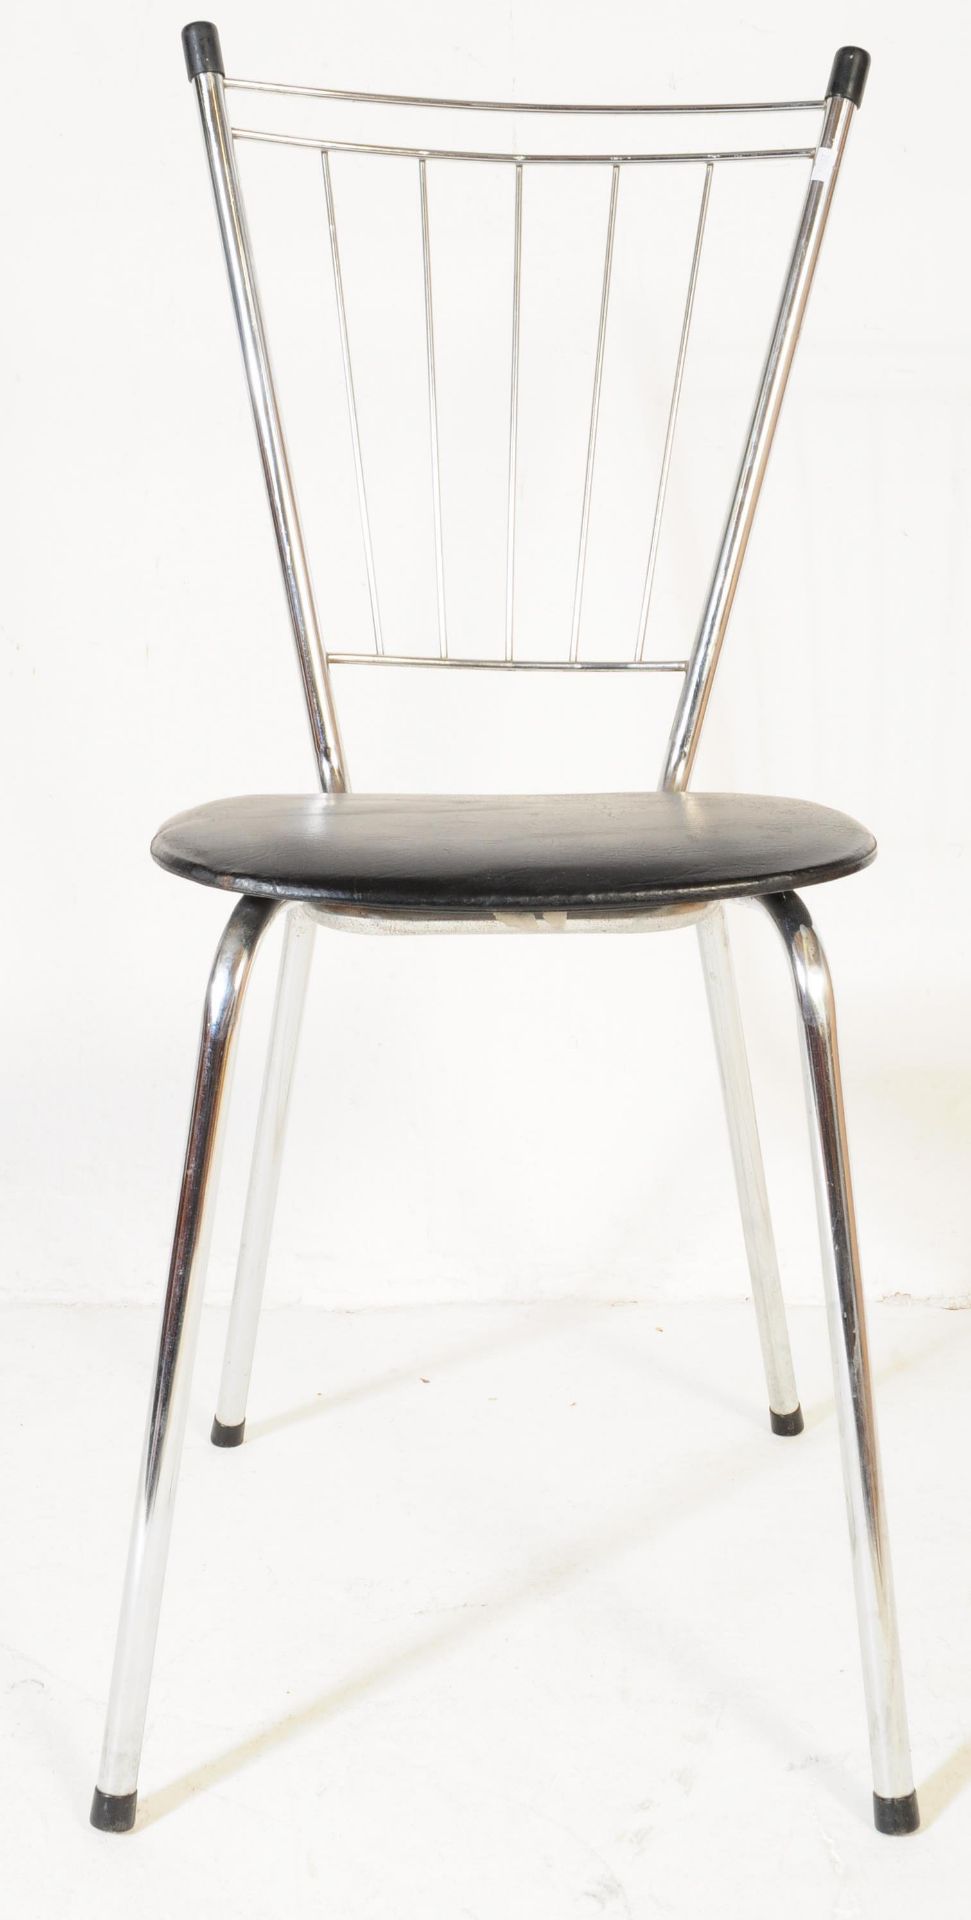 A PAIR OF SOUDEX FRENCH 1960'S CHROME & VINYL CHAIRS - Image 5 of 5